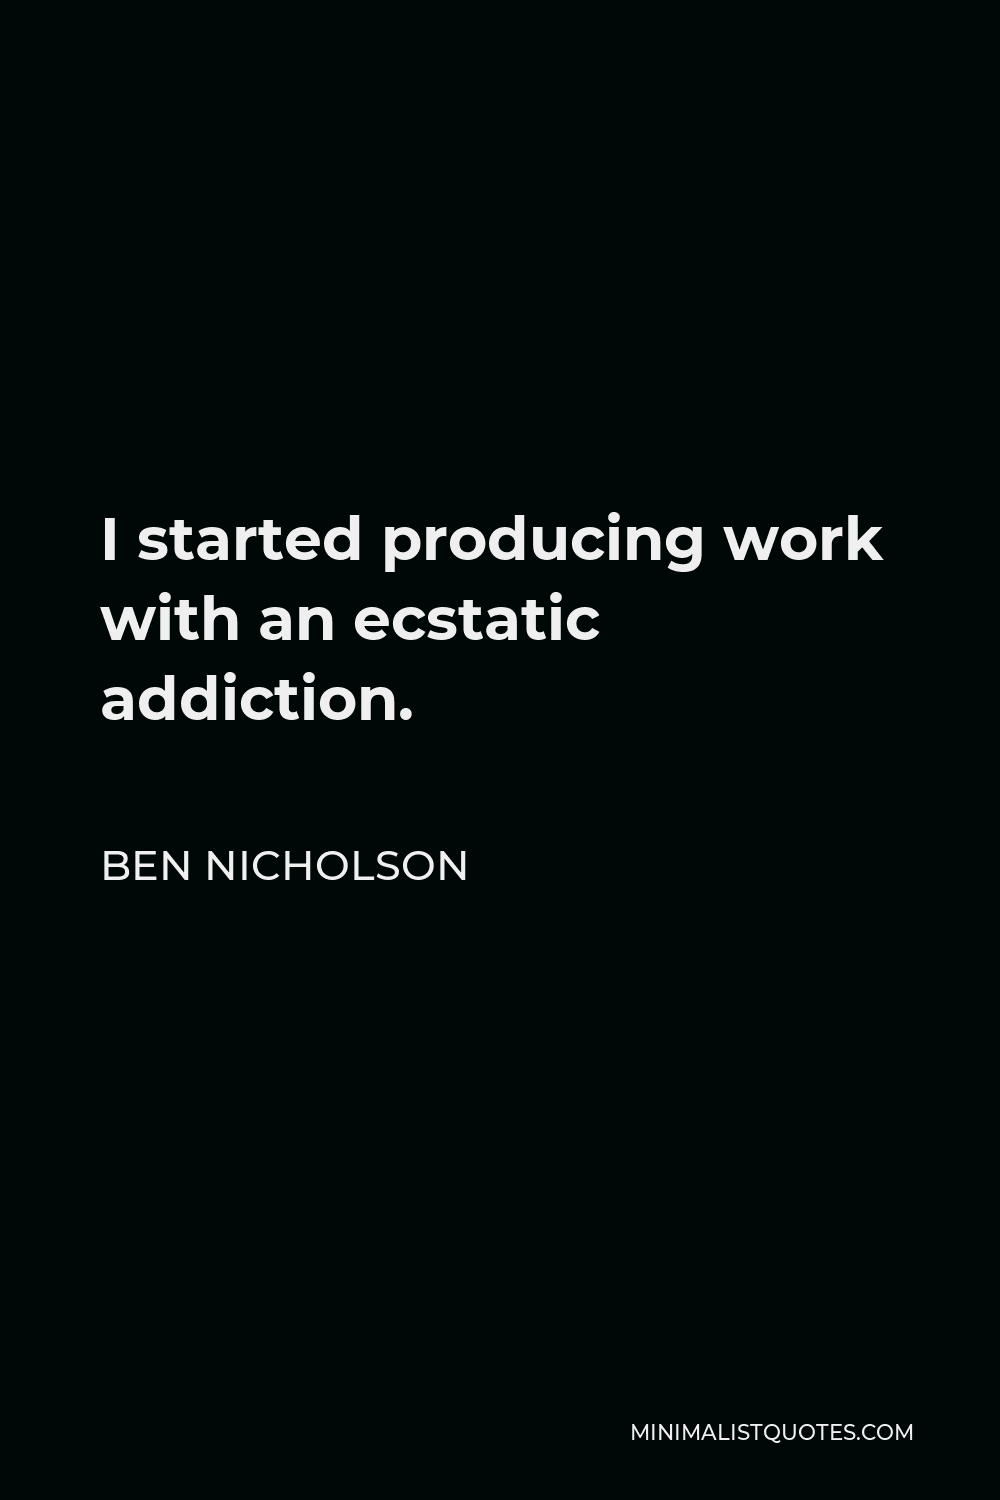 Ben Nicholson Quote - I started producing work with an ecstatic addiction.